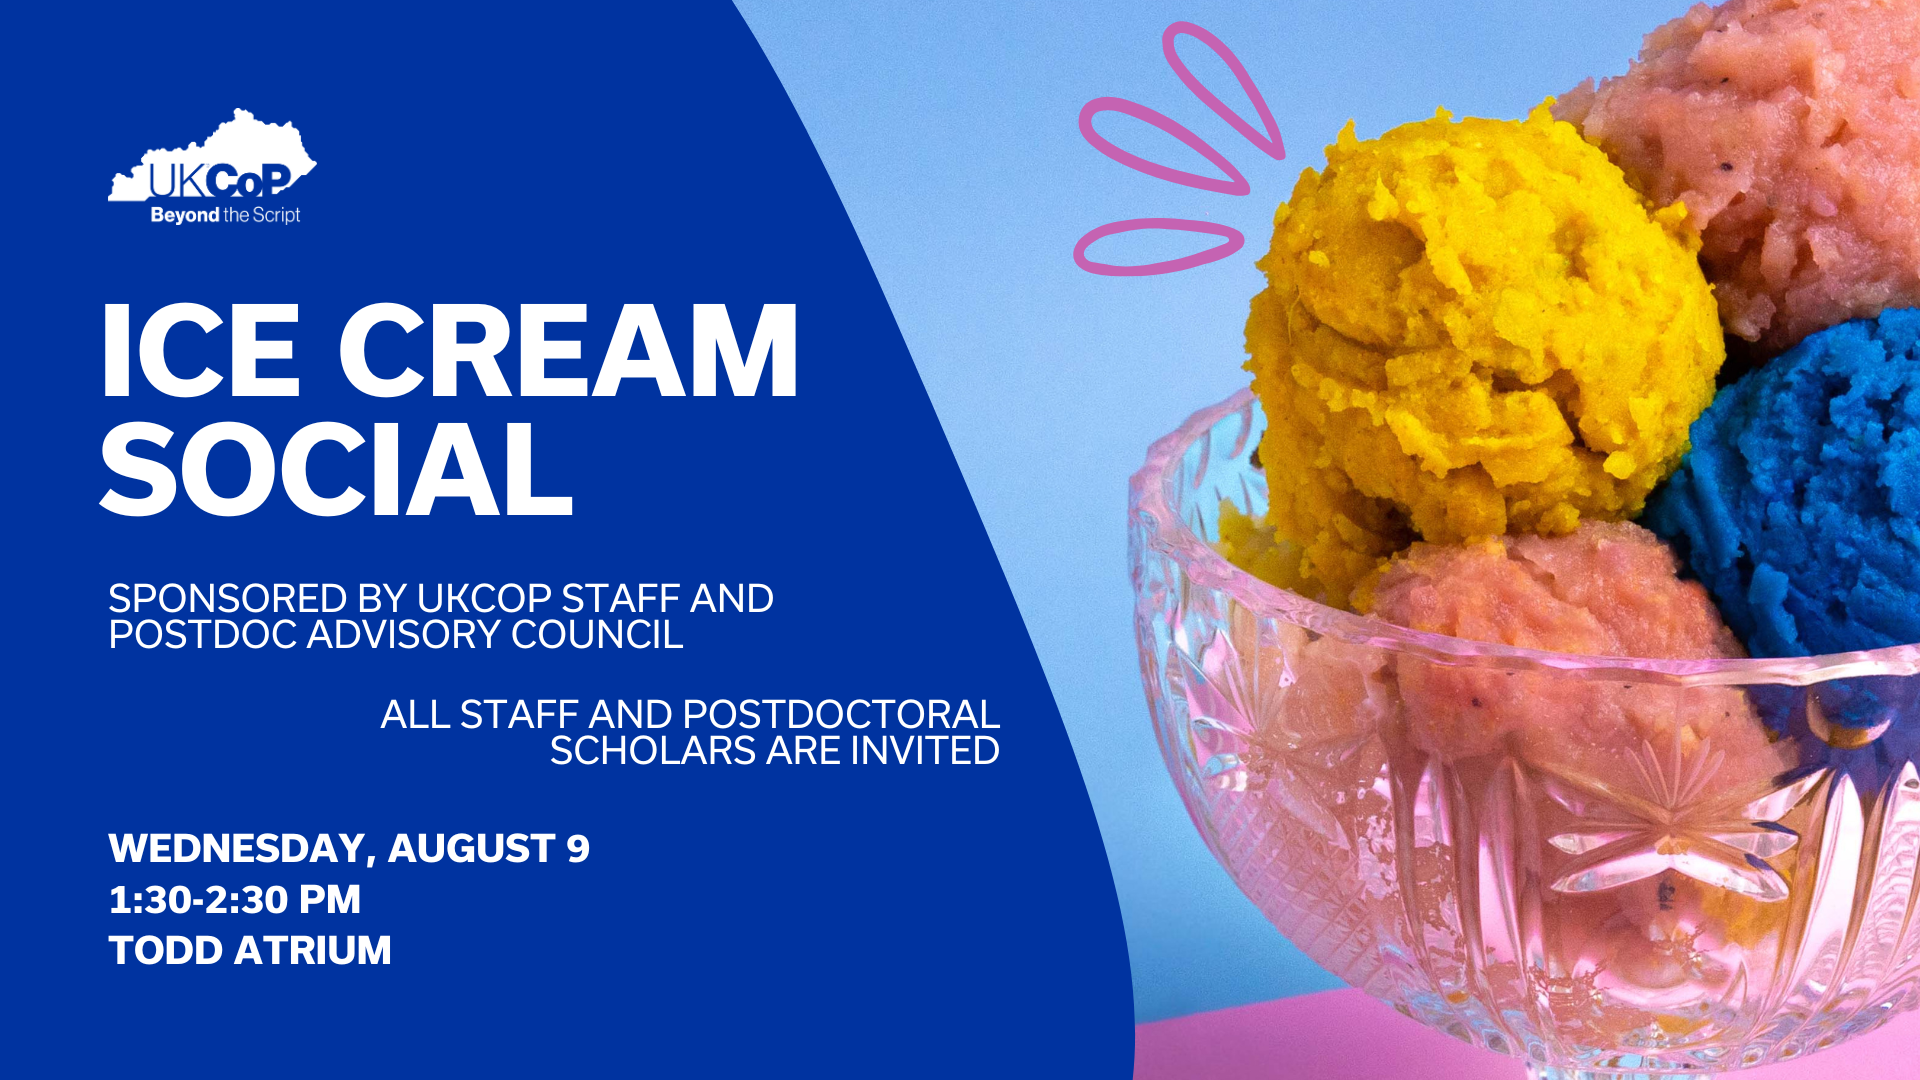 Ice Cream Social ad and info